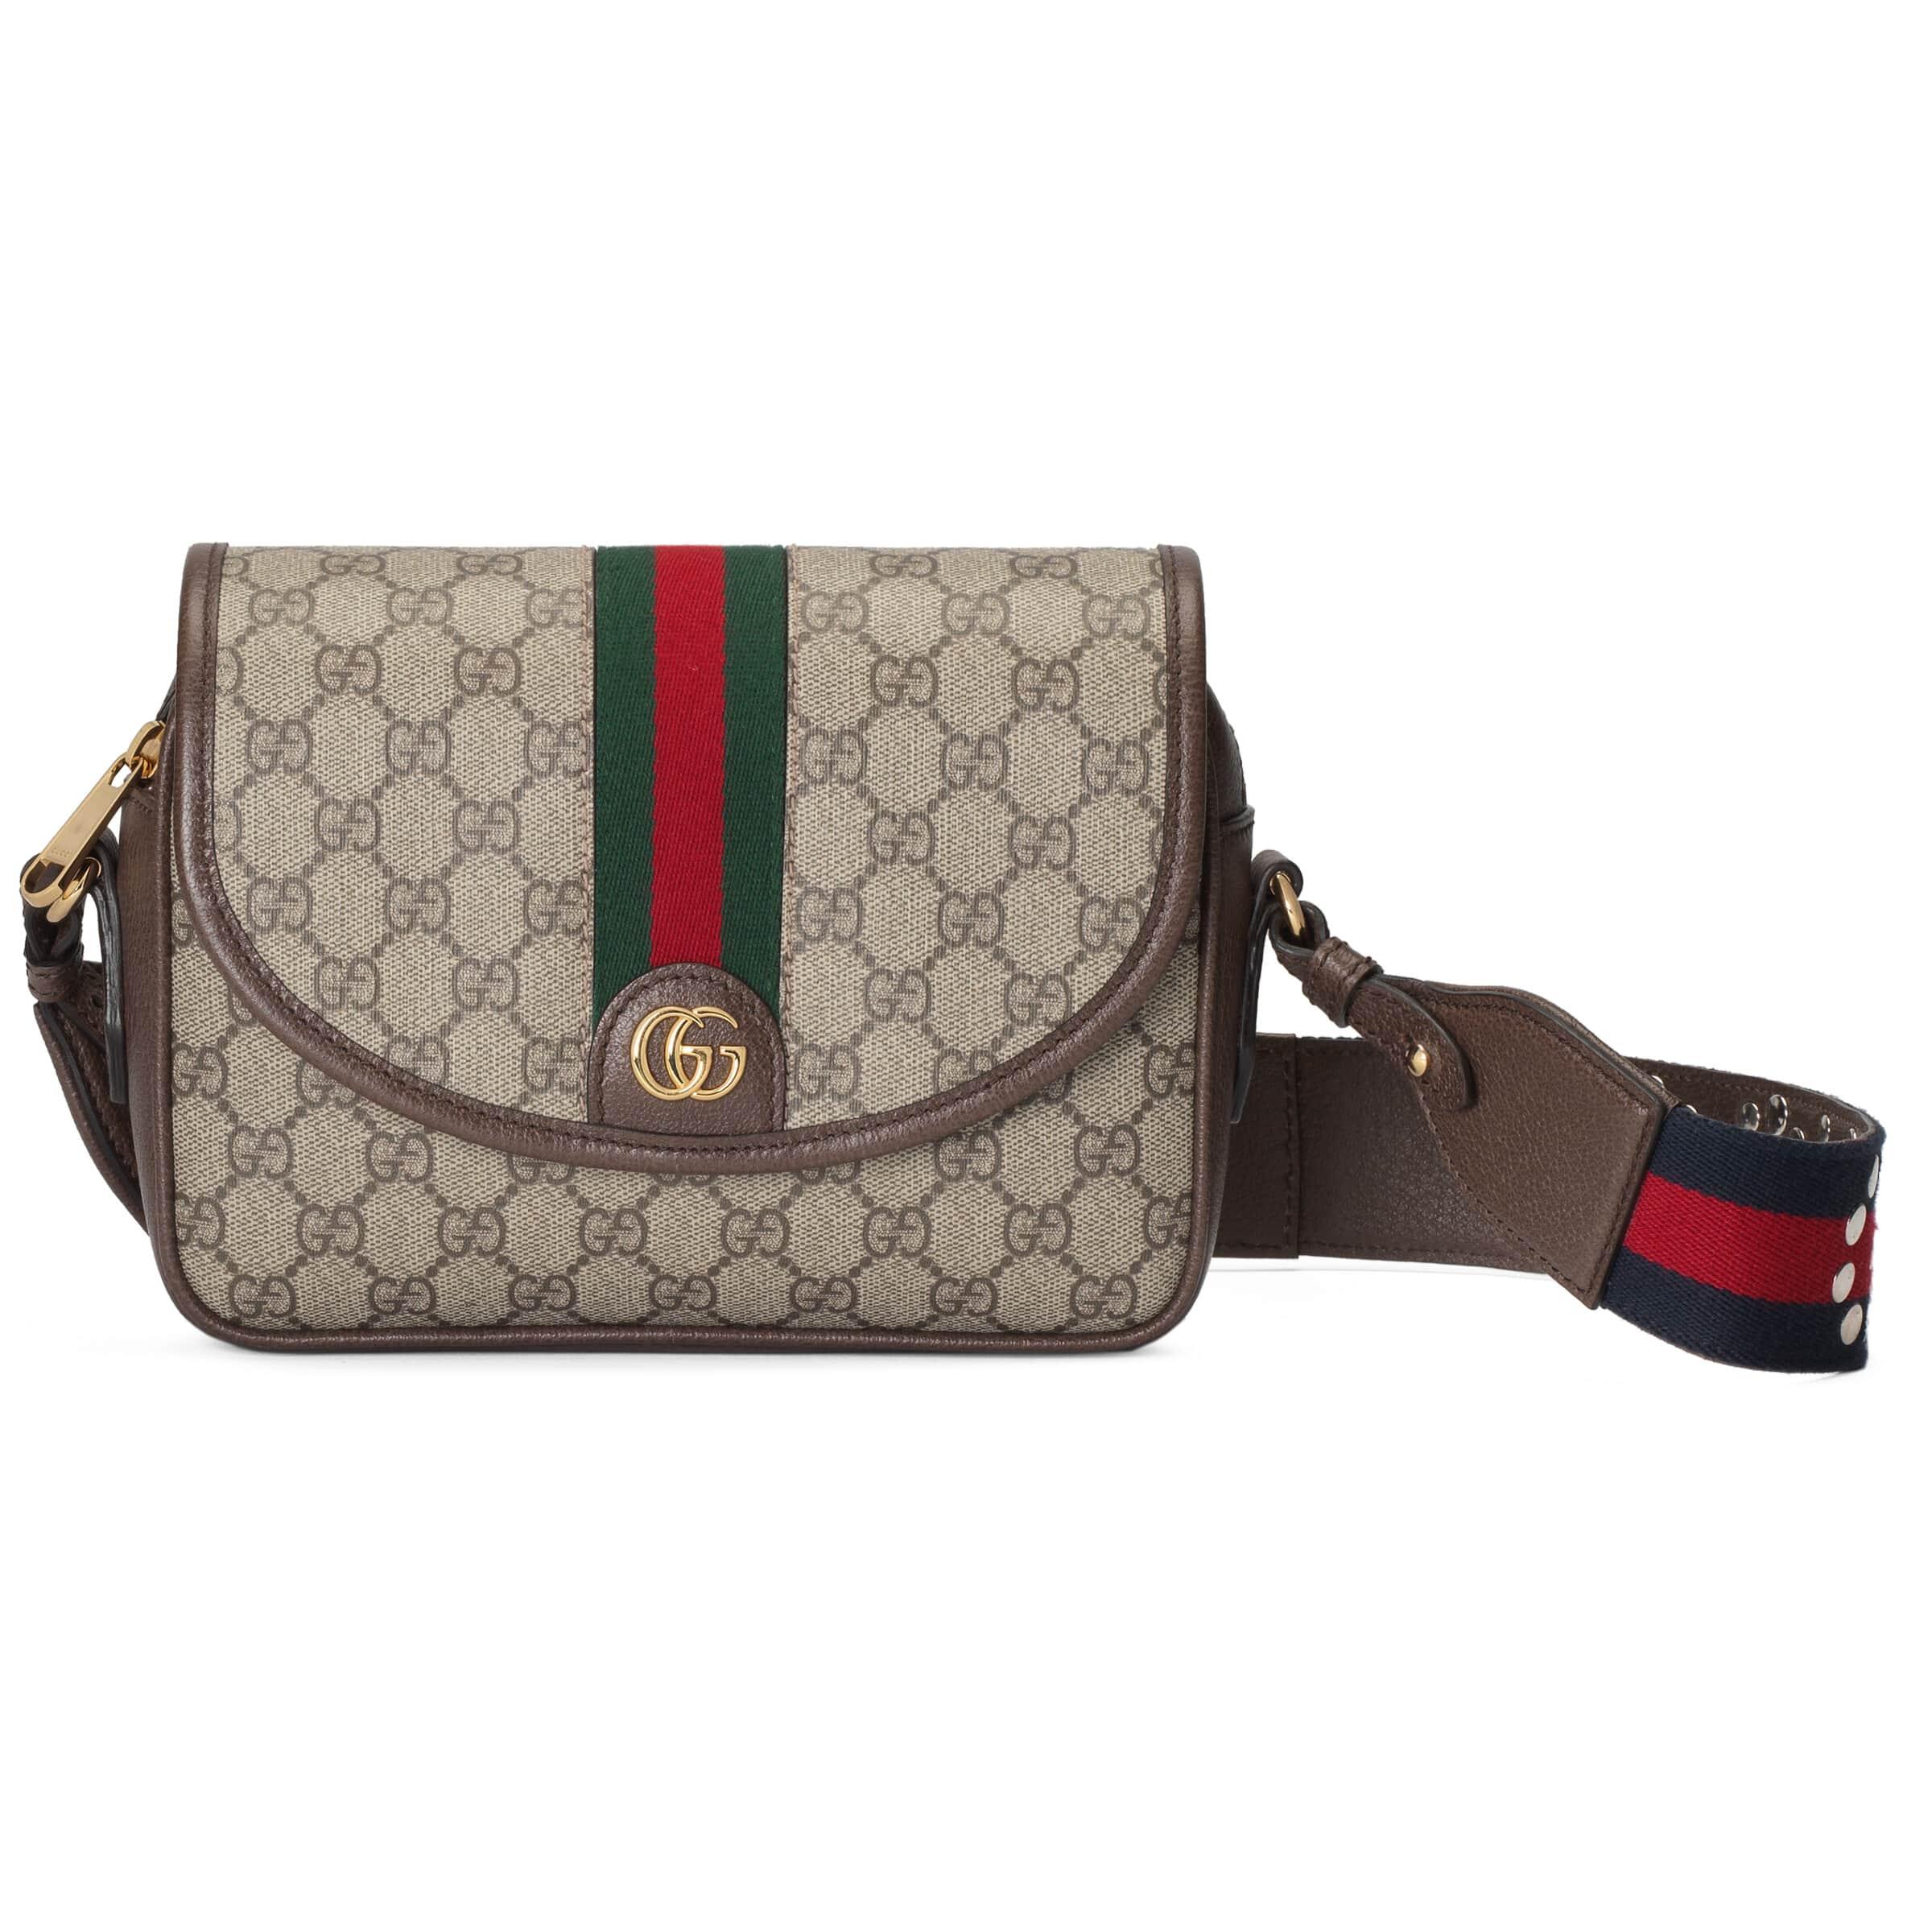 Gucci Ophidia GG Mini Shoulder Bag in Brown | Lyst